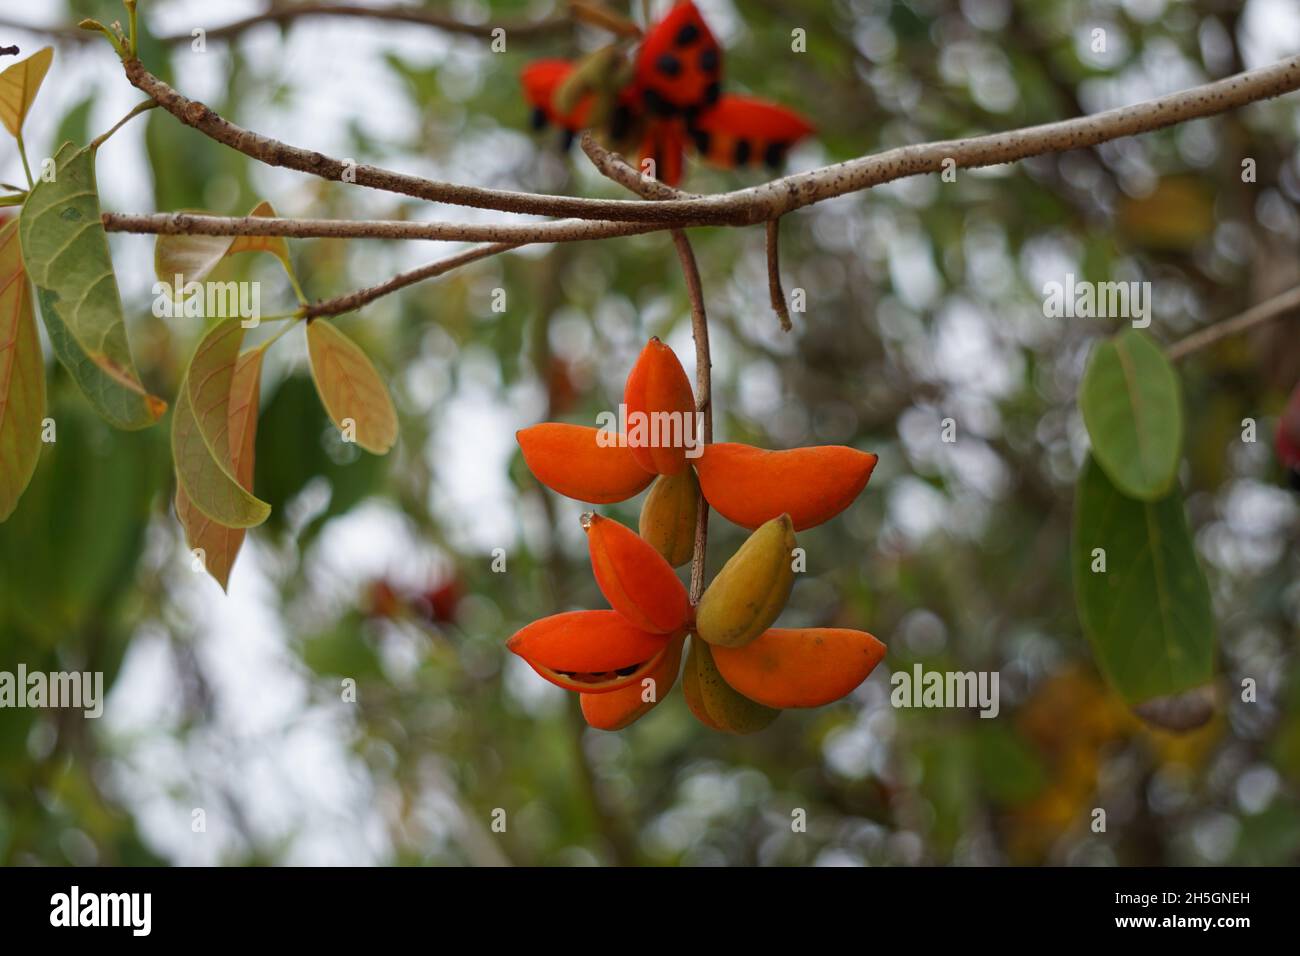 Sterculia quadrifida (Also called peanut tree, red-fruited kurrajong) on the tree. Seed pods are orange outside and orange or red inside when ripe. Stock Photo